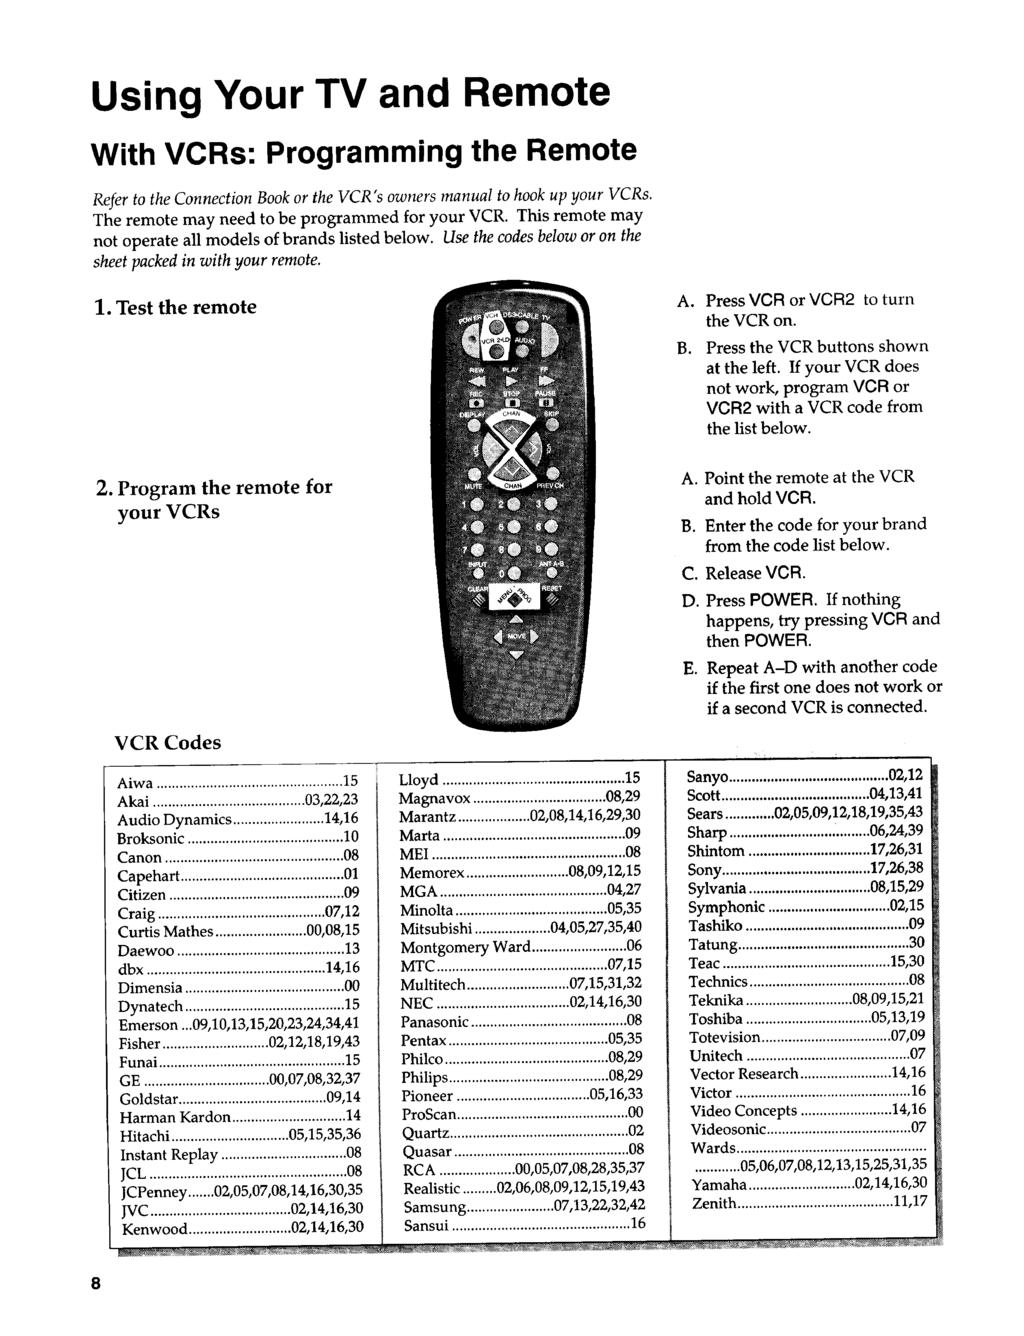 Using Your TV and Remote With VCRs: Programming the Remote Refer to the Connection Book or the VCR's owners manual to hook up your VCRs. The remote may need to be programmed for your VCR.